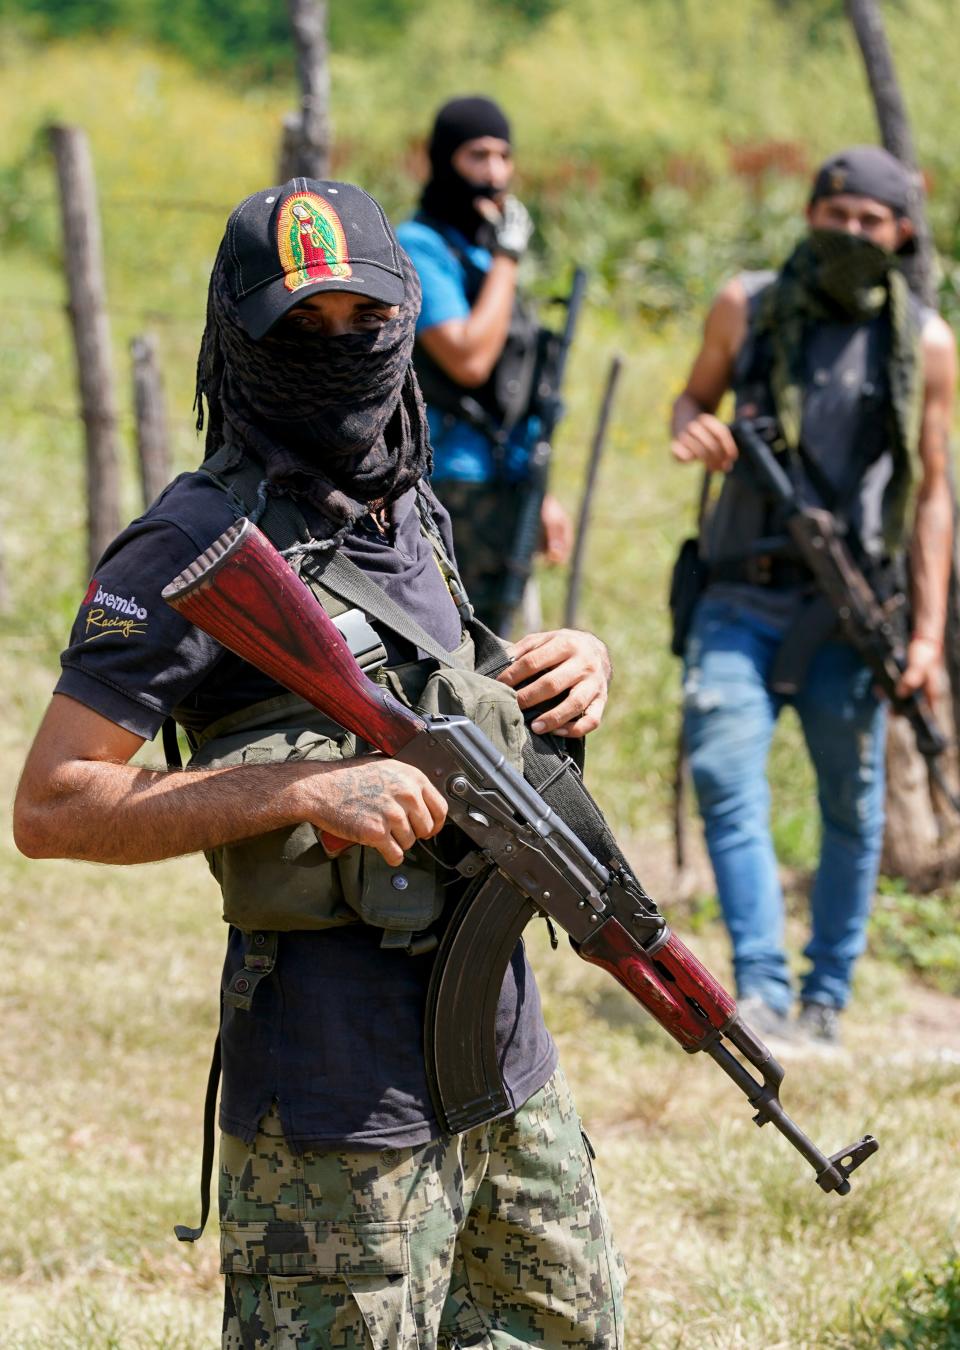 Armed men who claim to be members of a “self-defense” squad patrol the limits of Taixtan, in the Michoacan state of Mexico, Oct. 28, 2021. The army has largely stopped fighting drug cartels here.